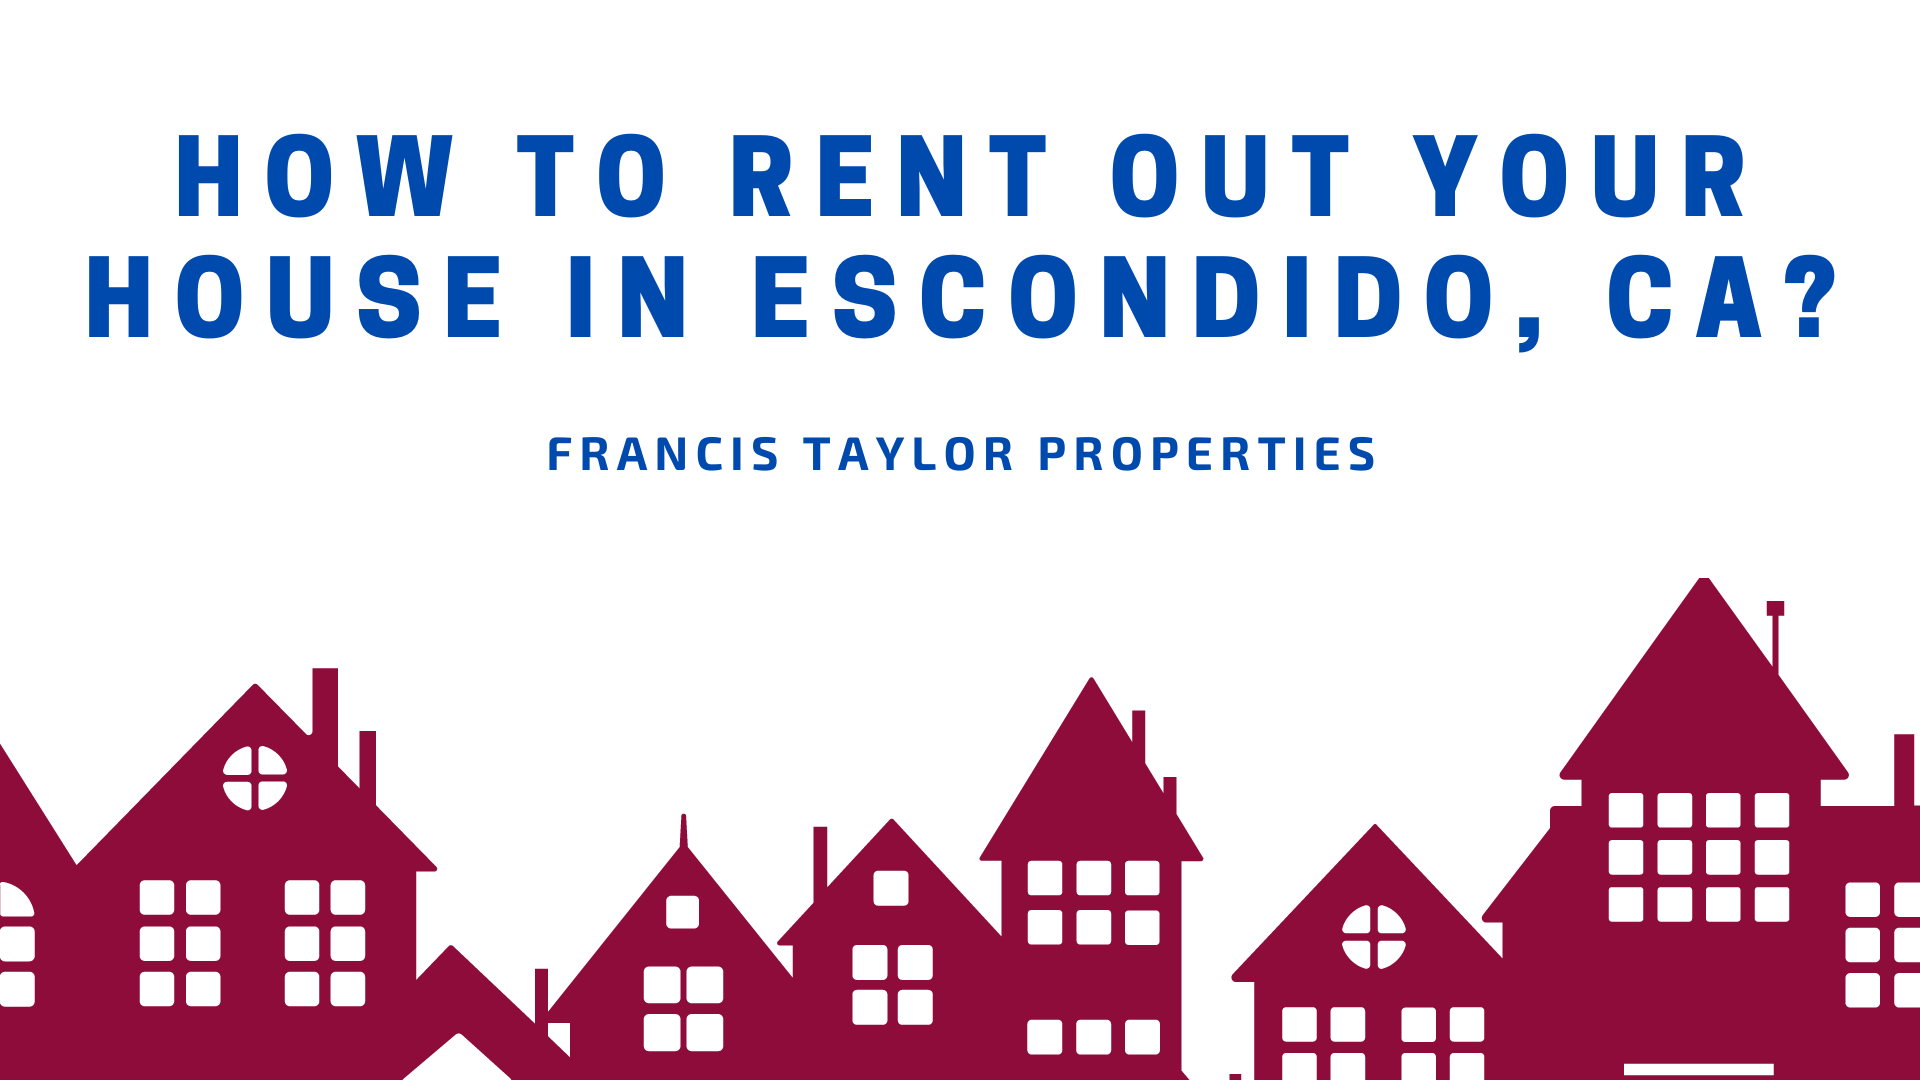 How to Rent Out Your House in Escondido, CA?